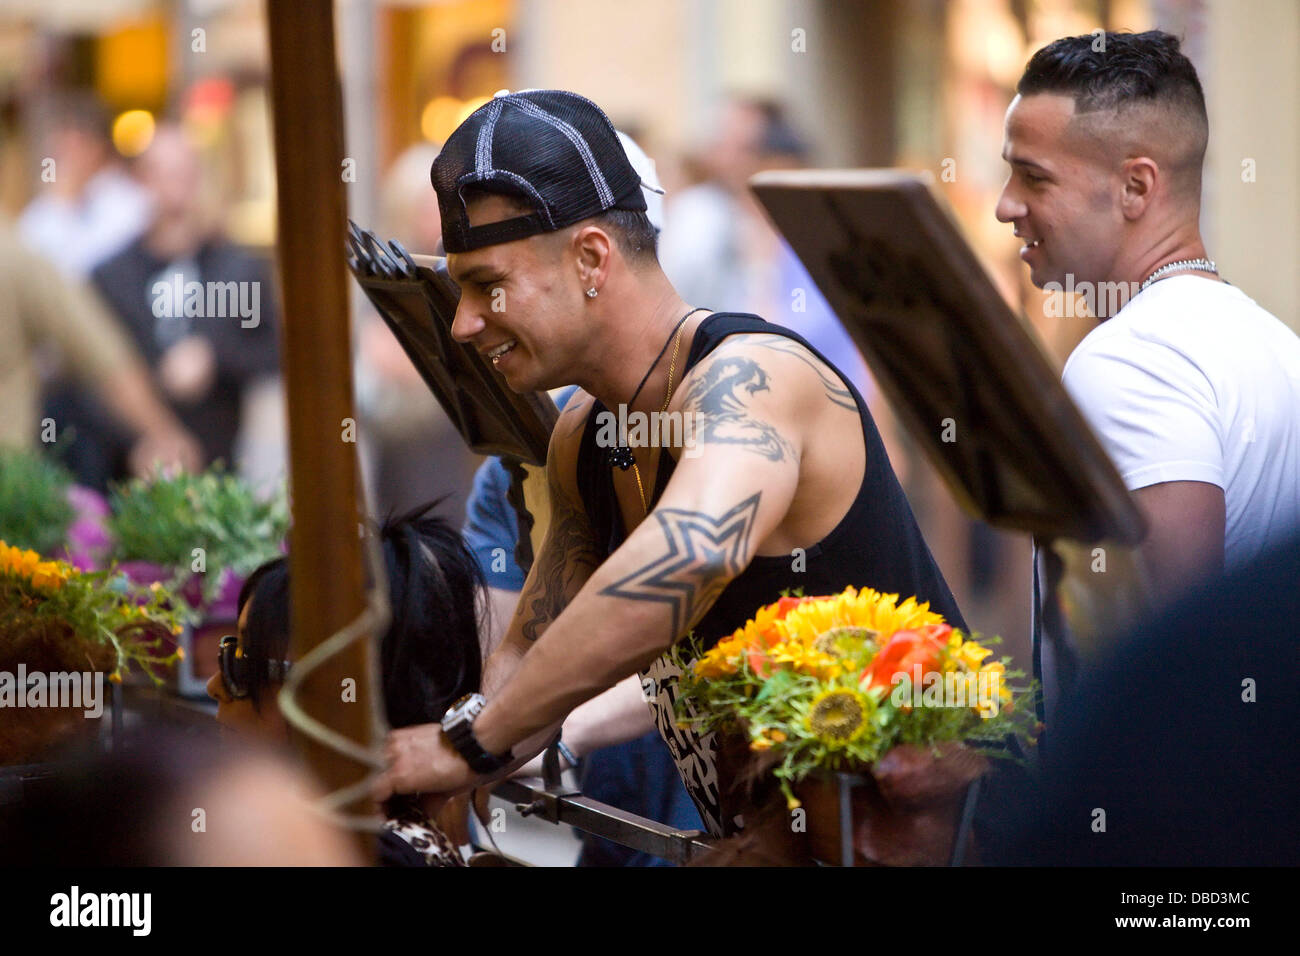 DJ Pauly D, real name Paul DelVecchio and Mike 'The Situation' Sorrentino of 'Jersey Shore' stop by to talk to Snooki and Ronnie who were out having dinner together Florence, Italy - 20.05.11 Stock Photo